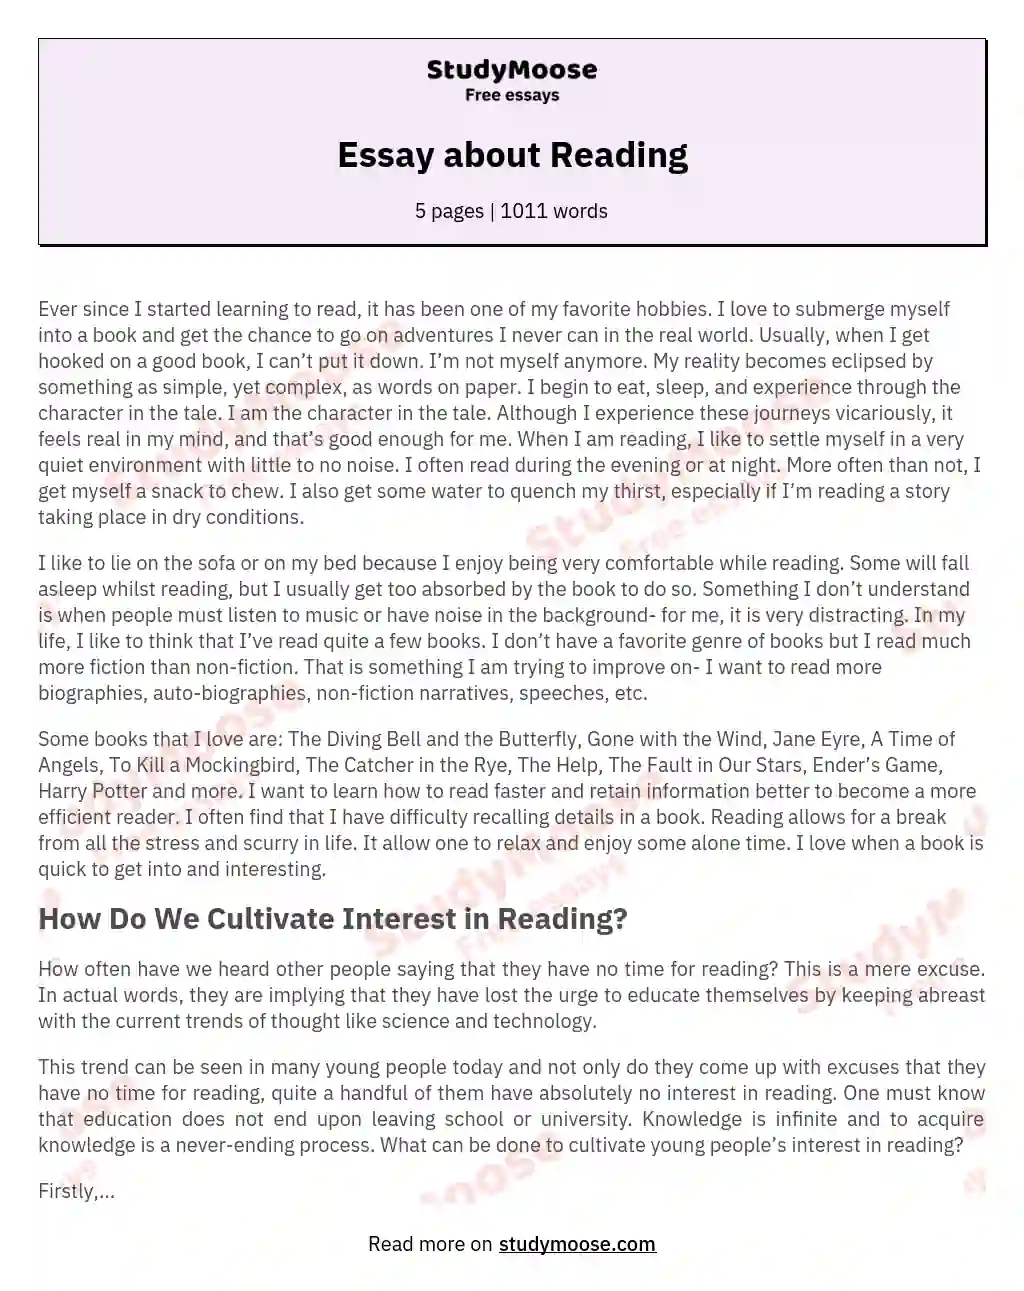 best title for essay about reading